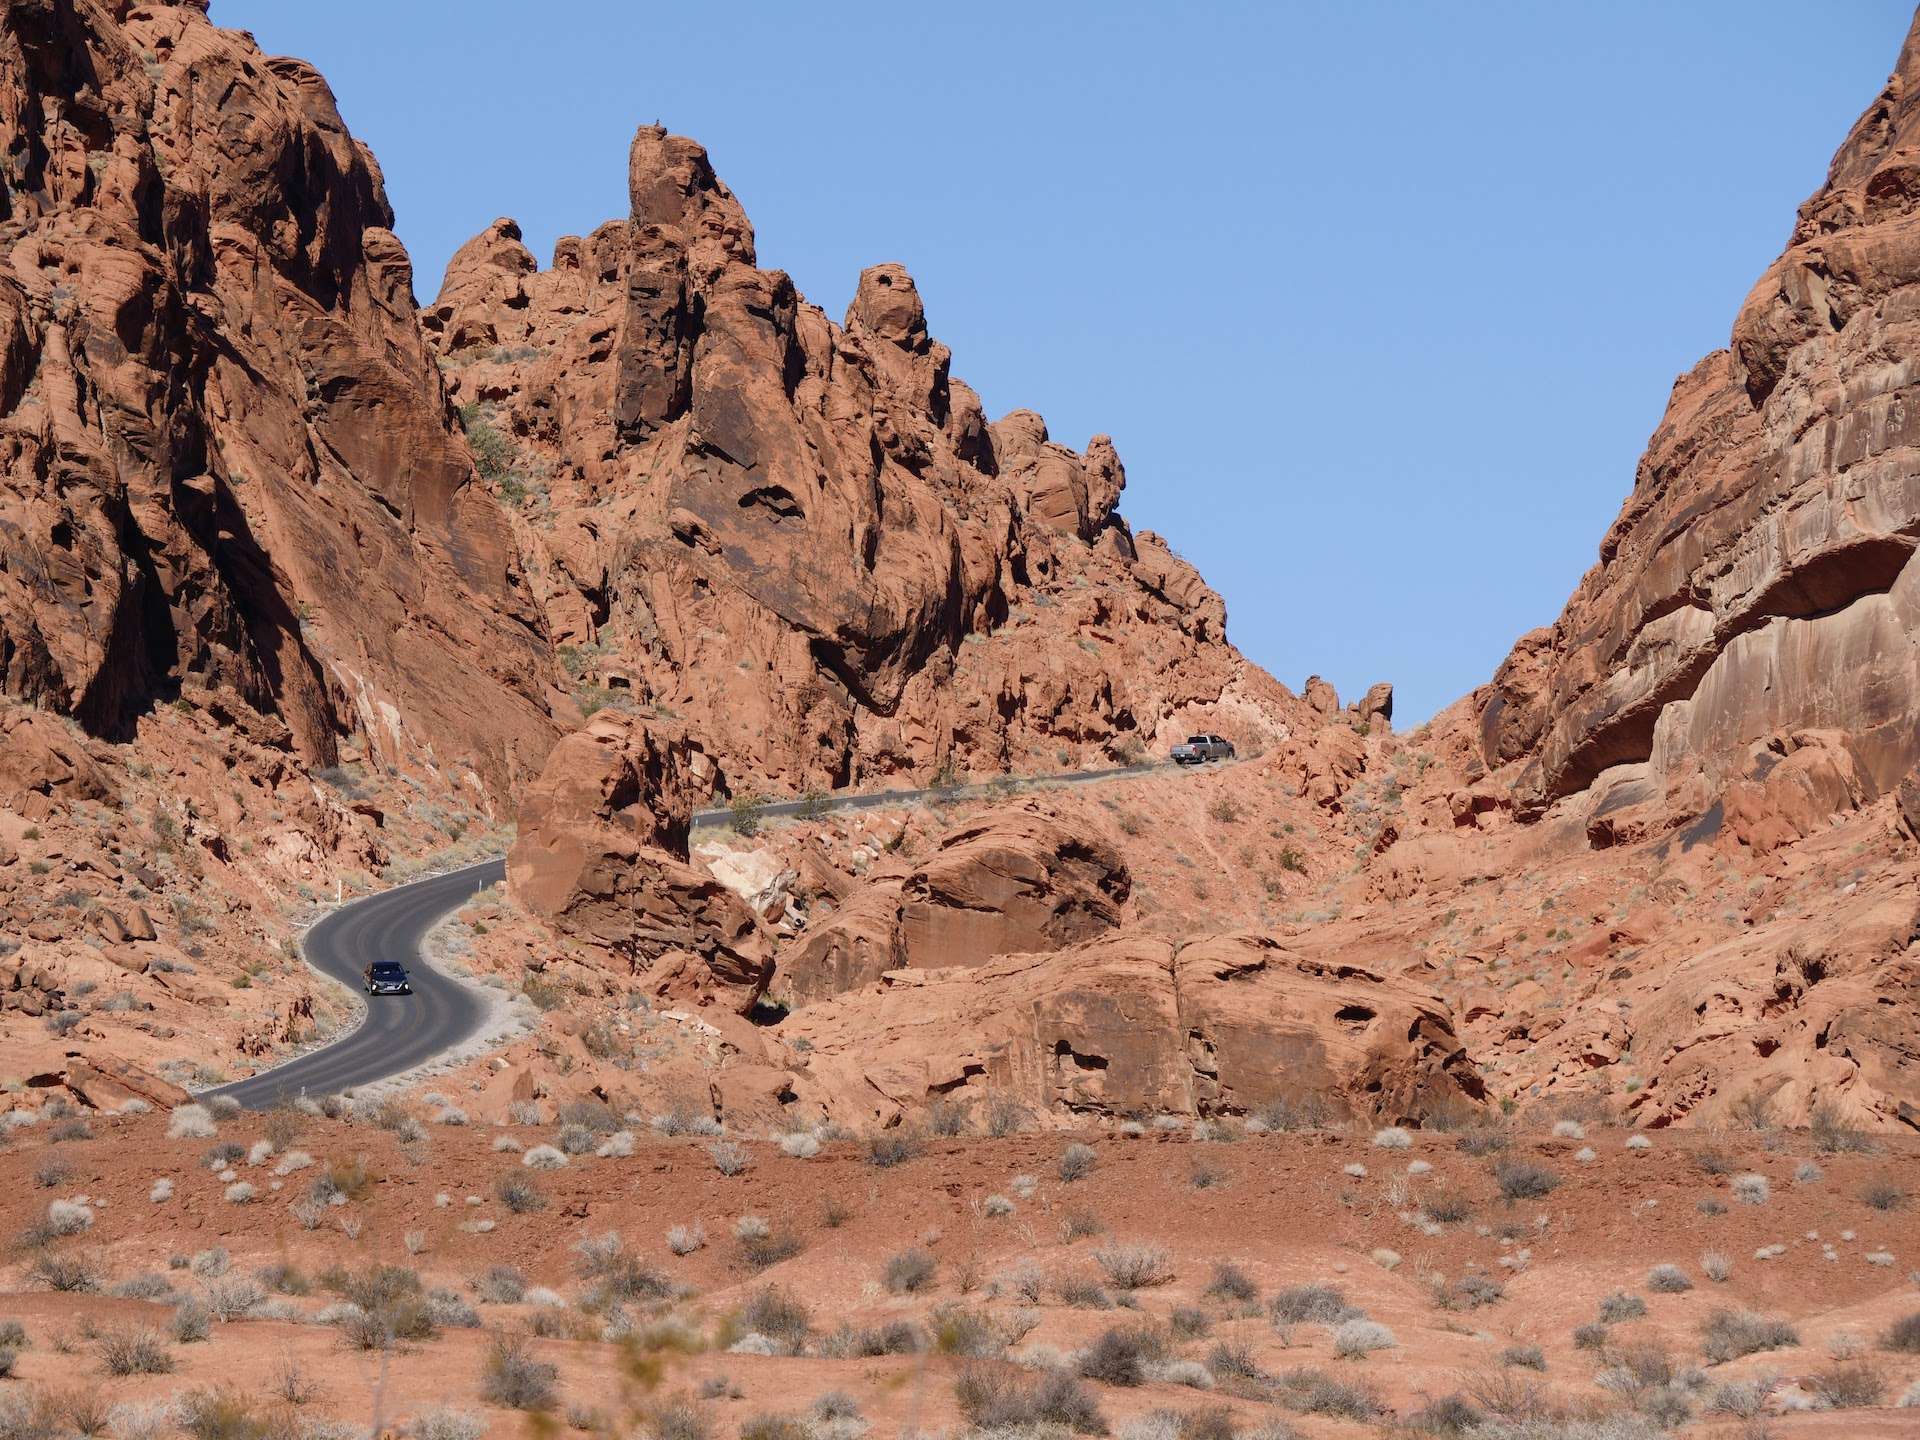 Take a drive through the fiery red rocks in Valley of Fire State Park in Nevada.